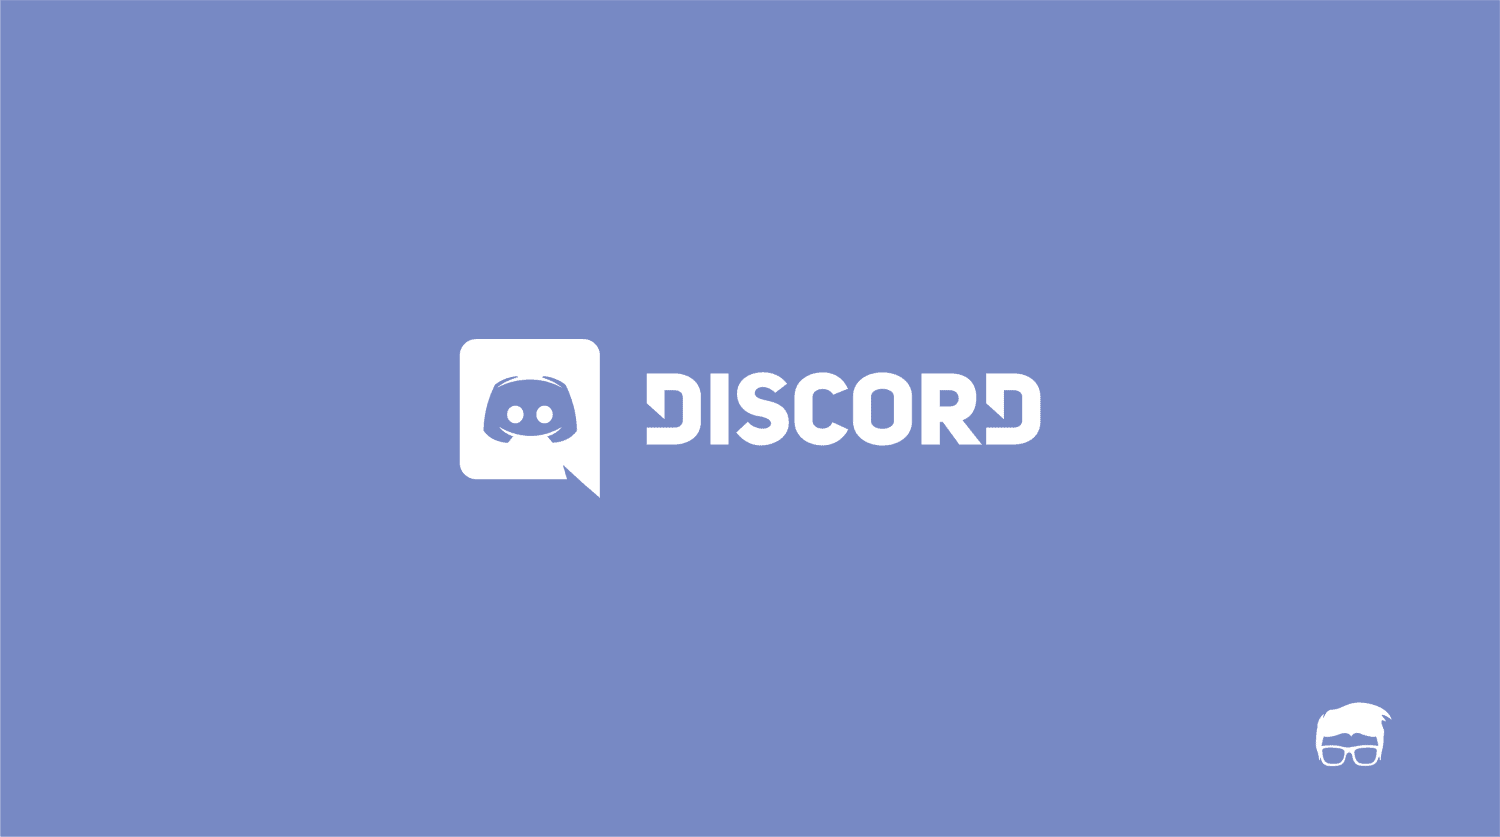 How Does Discord Make Money? | Discord Business Model